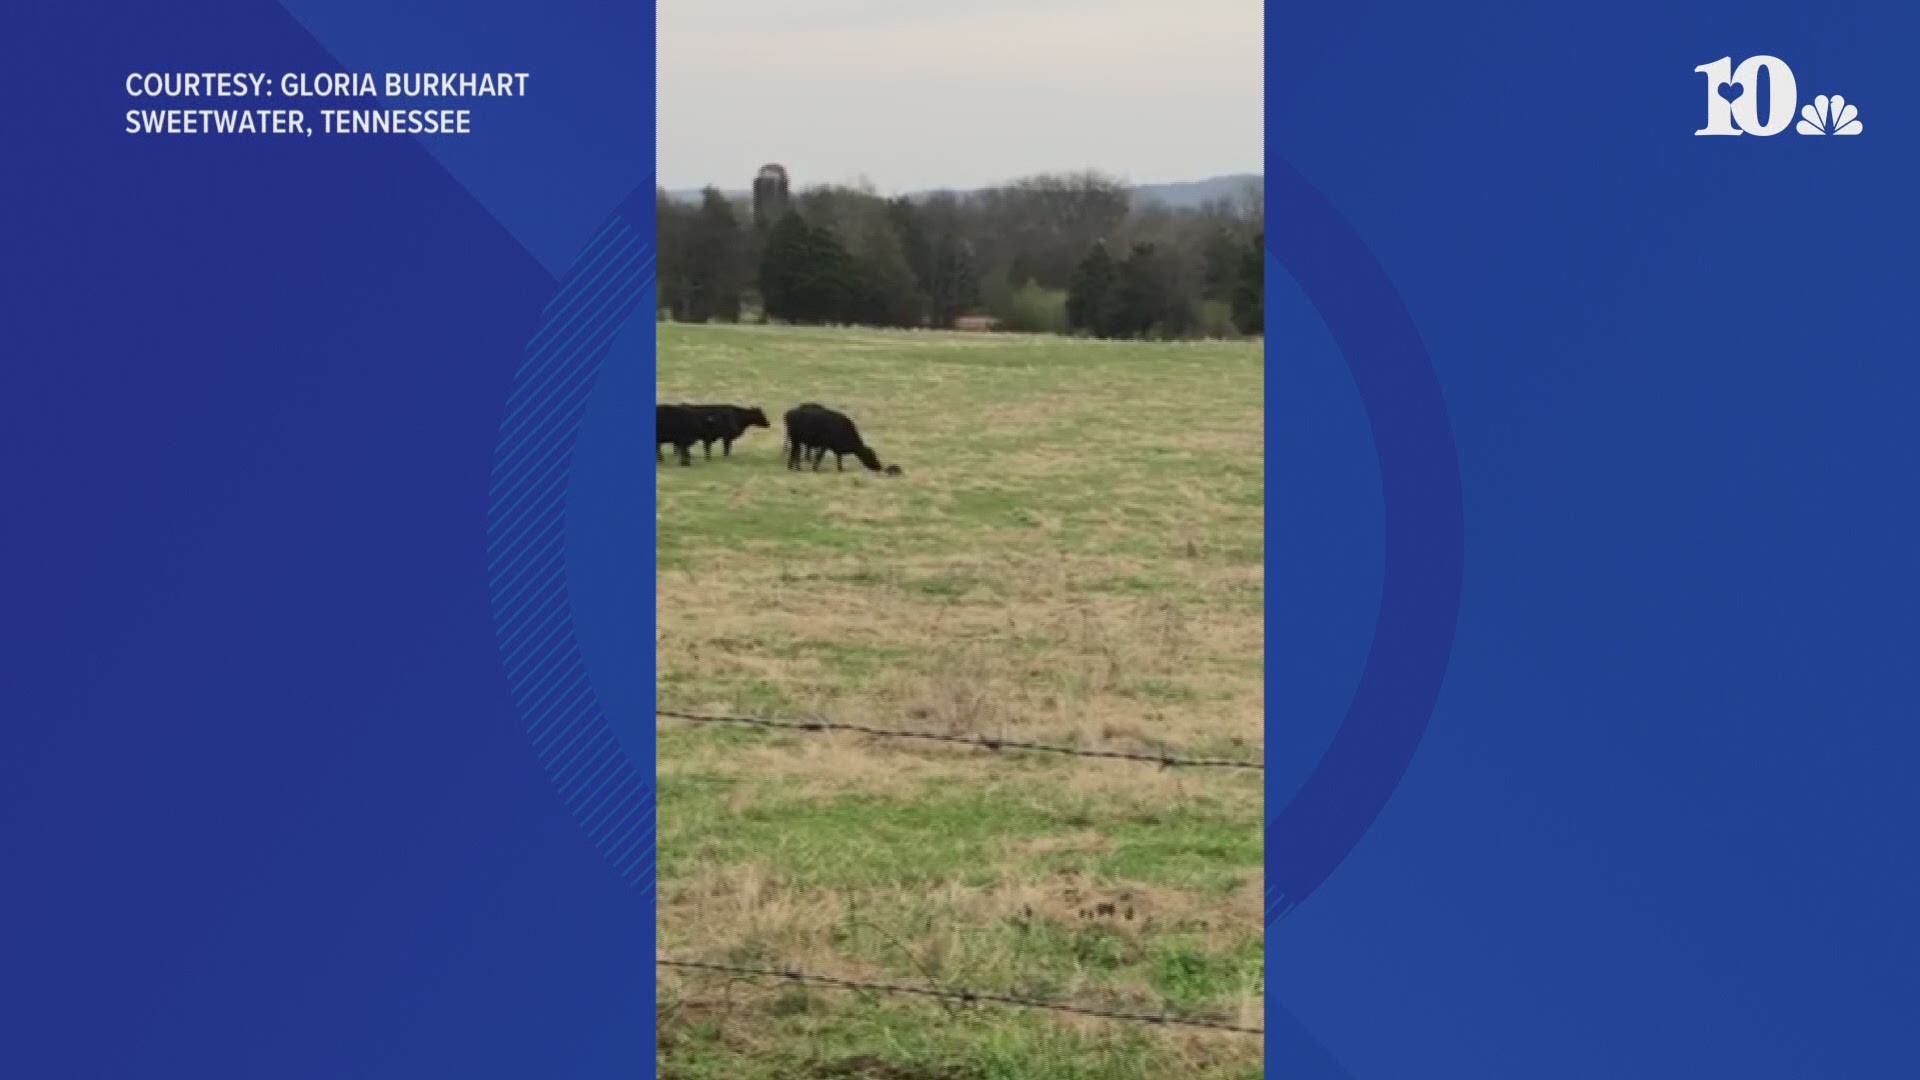 Gloria Burkhart saw what she thought was a new baby calf in her cow field. But then, it got up and started running.